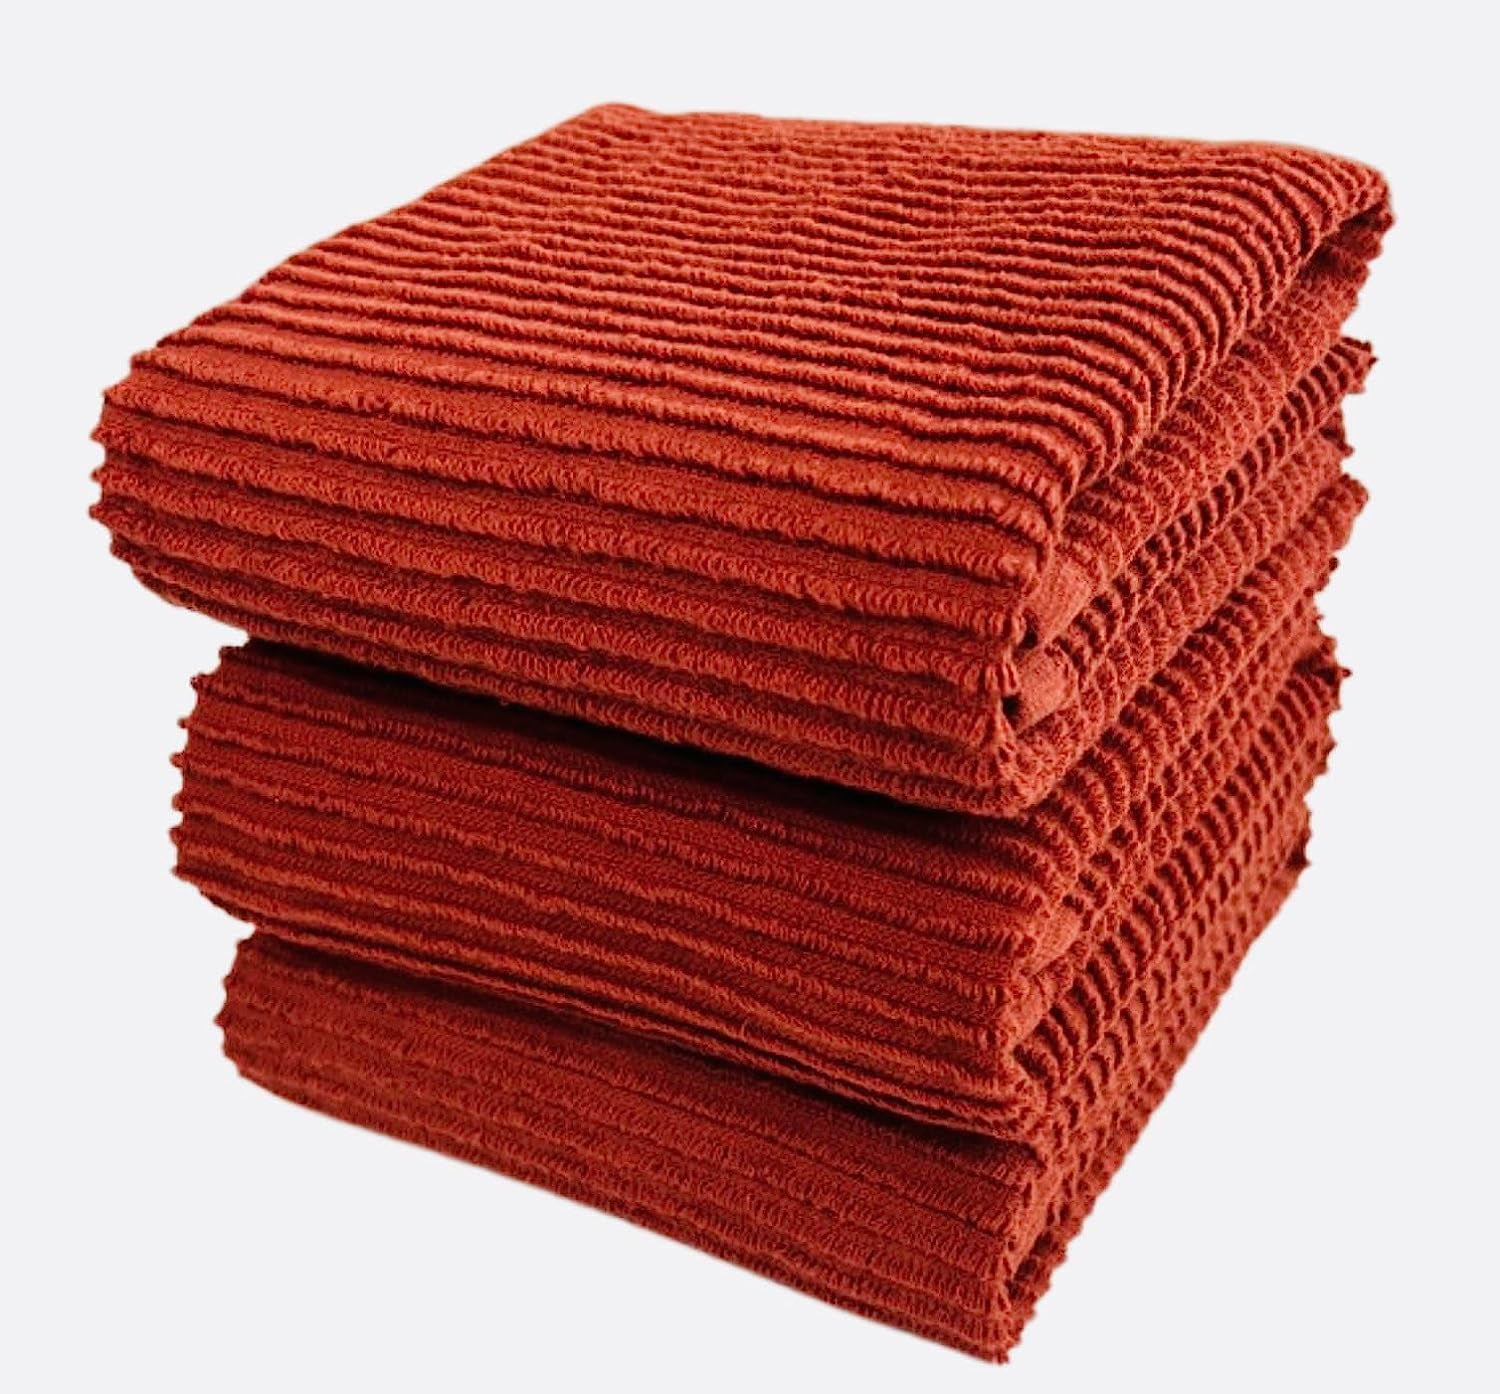 Serafina Home Oversized Solid Color Burnt Orange Kitchen Towels: 100%  Cotton Soft Absorbent Ribbed Terry Loop, Set of 3 for Multi Purpose  Everyday Use